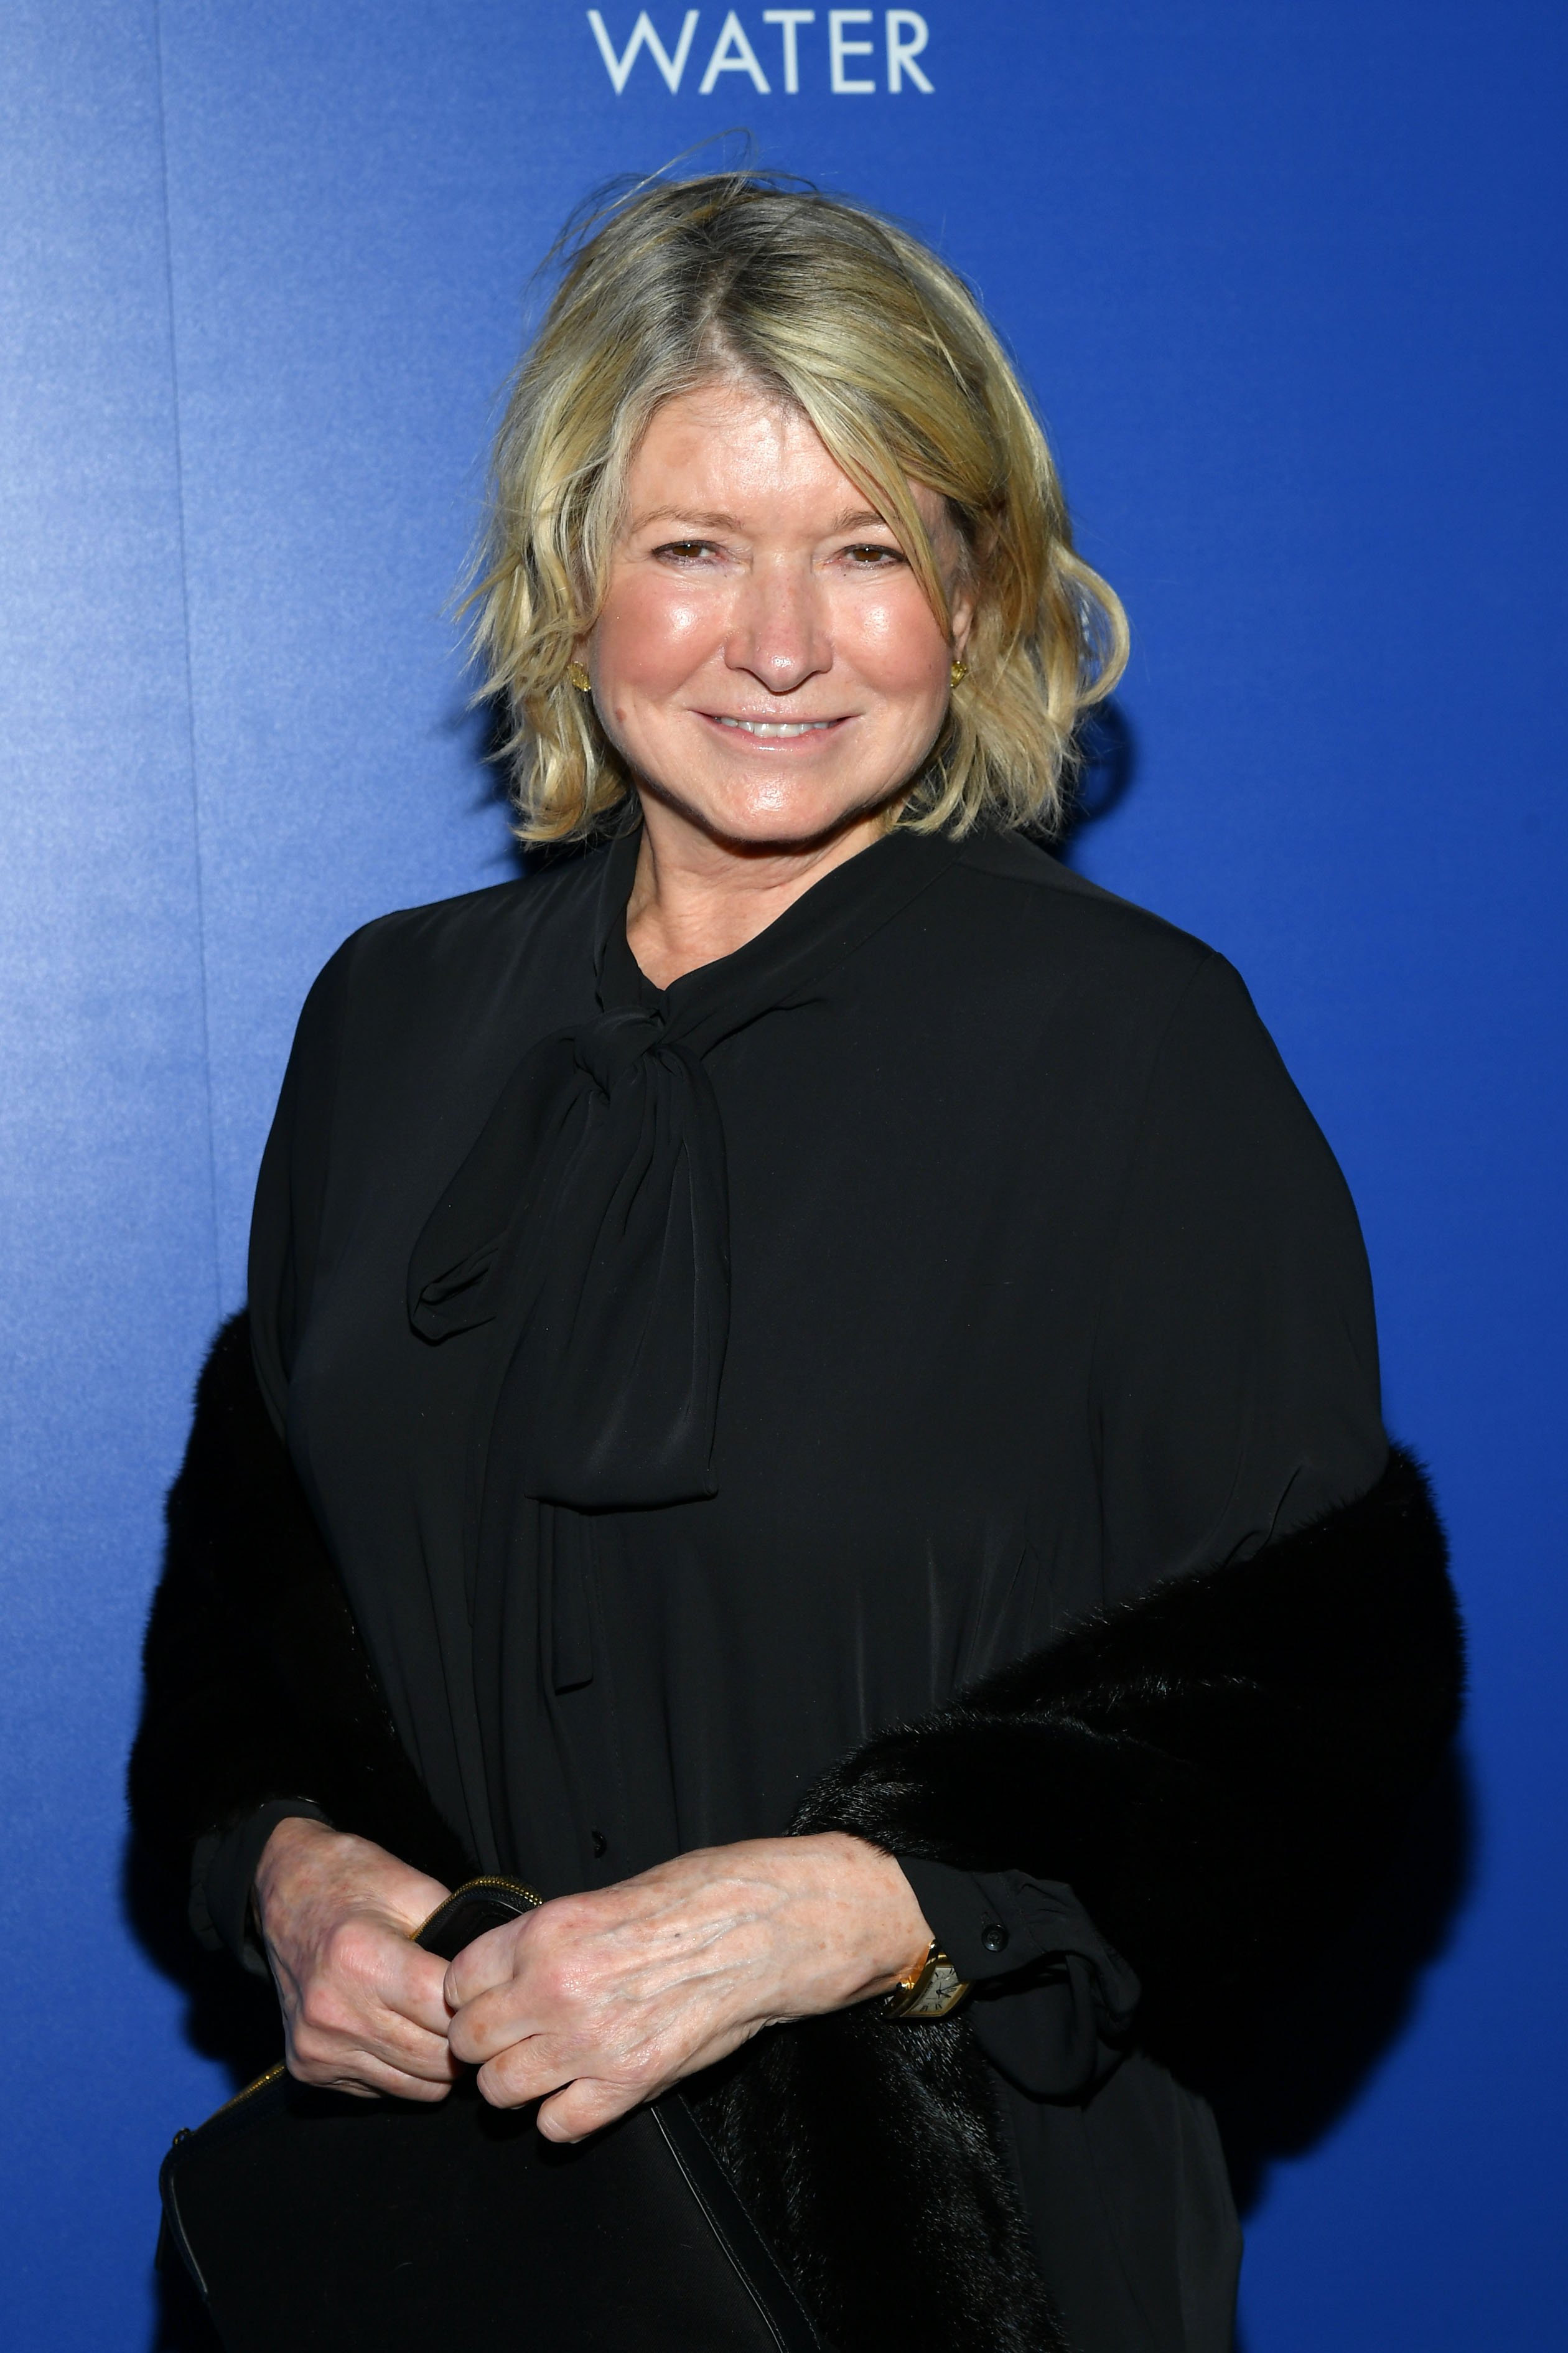 Martha Stewart attends the "Mary Poppins Returns" on December 17, 2018, in New York City. | Source: Getty Images.